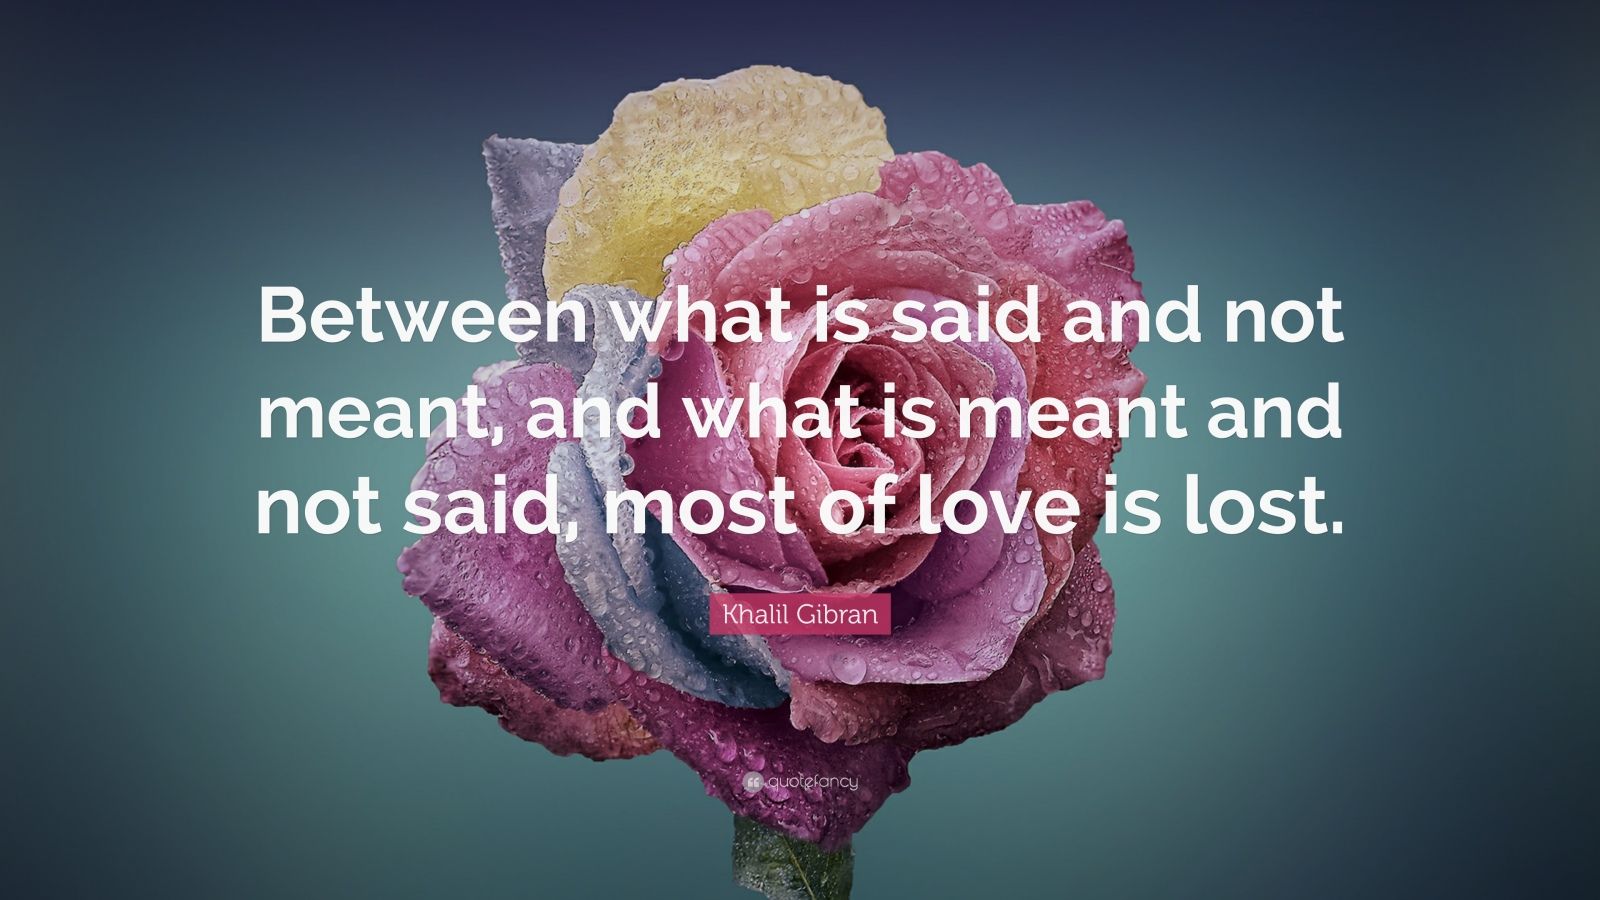 Khalil Gibran Quote: “Between what is said and not meant, and what is